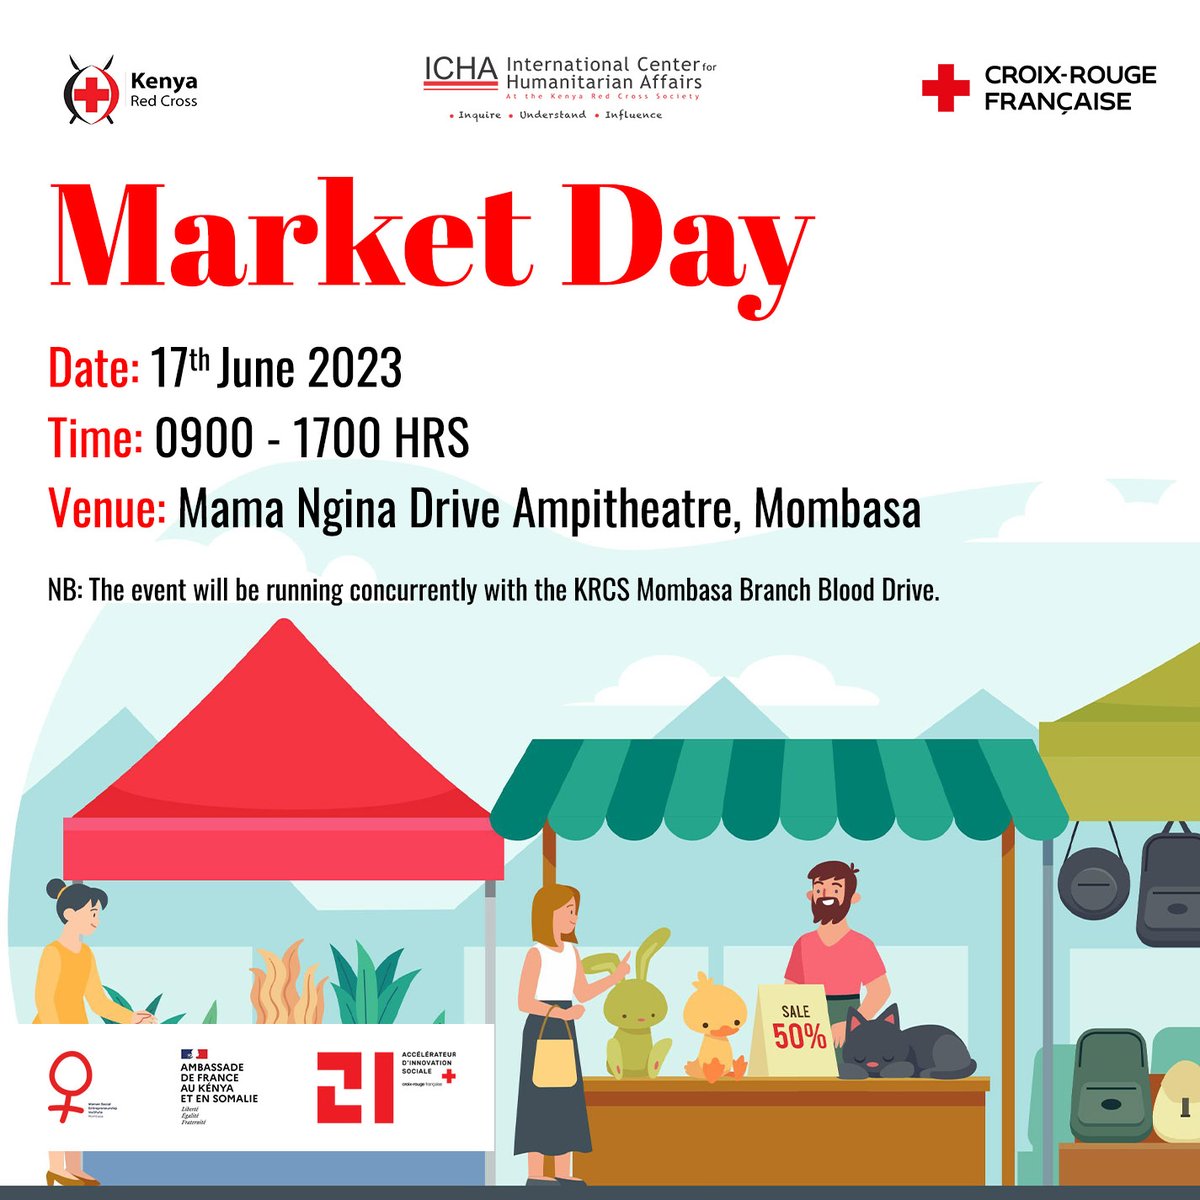 Join us at the Mama Ngina Drive Amphitheatre in Mombasa for a #MARKETDAY on Saturday! Experience the vibrant atmosphere as entrepreneurs from @KenyaRedCross showcase Coastal food & cultural items.
#BloodDonationDay @red_mombasa @franceinKenya, @CroixRouge @21CroixRouge @icha_krc